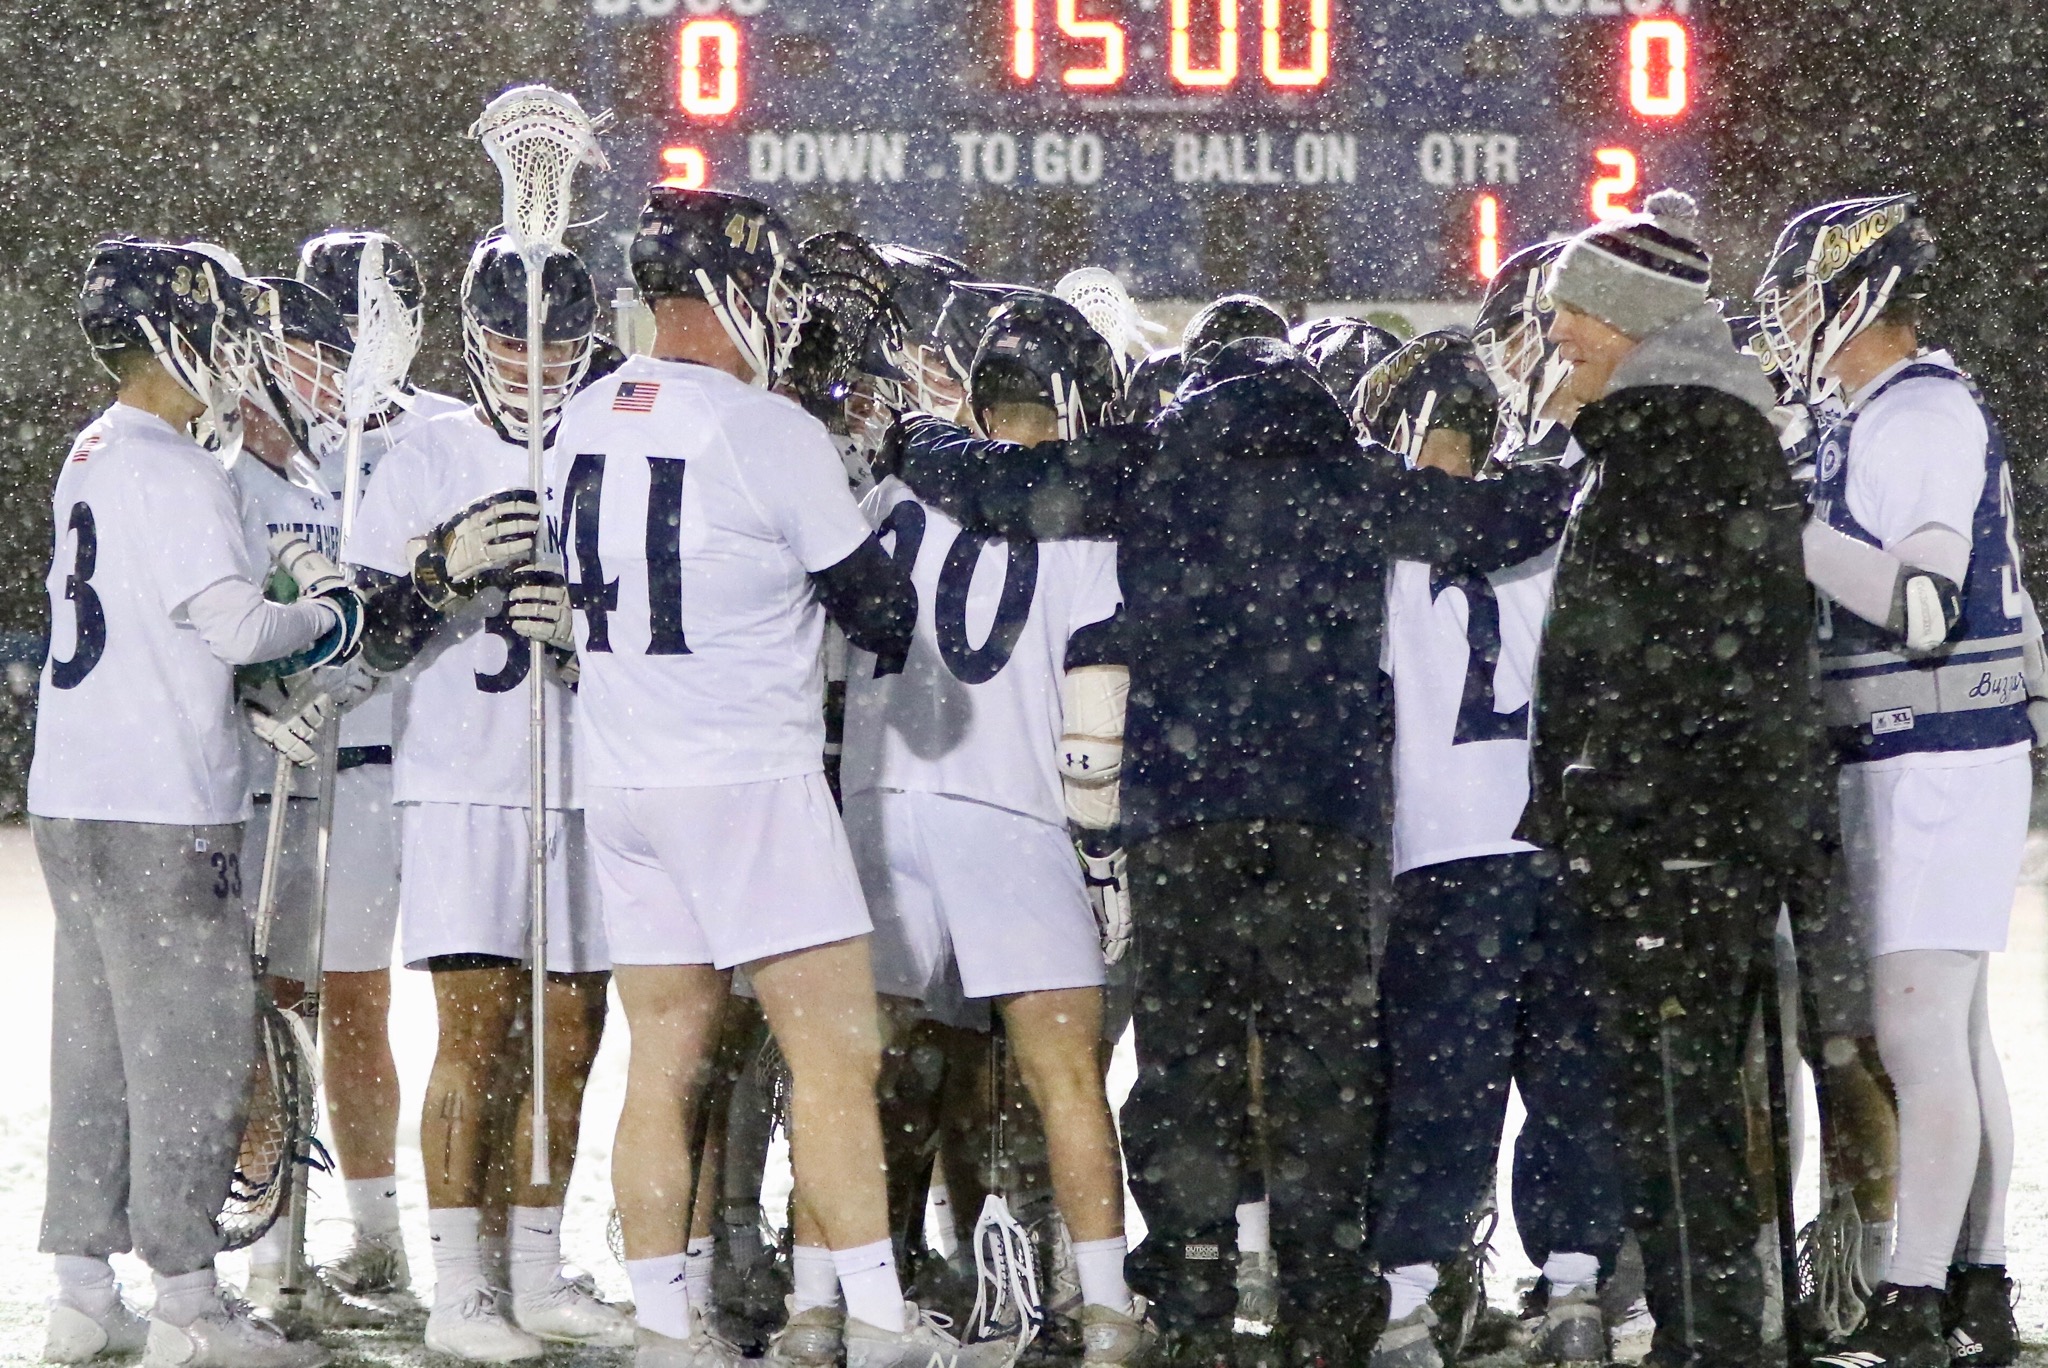 Men's Lacrosse: Cadets Win Close, Physical Battle in the Snow